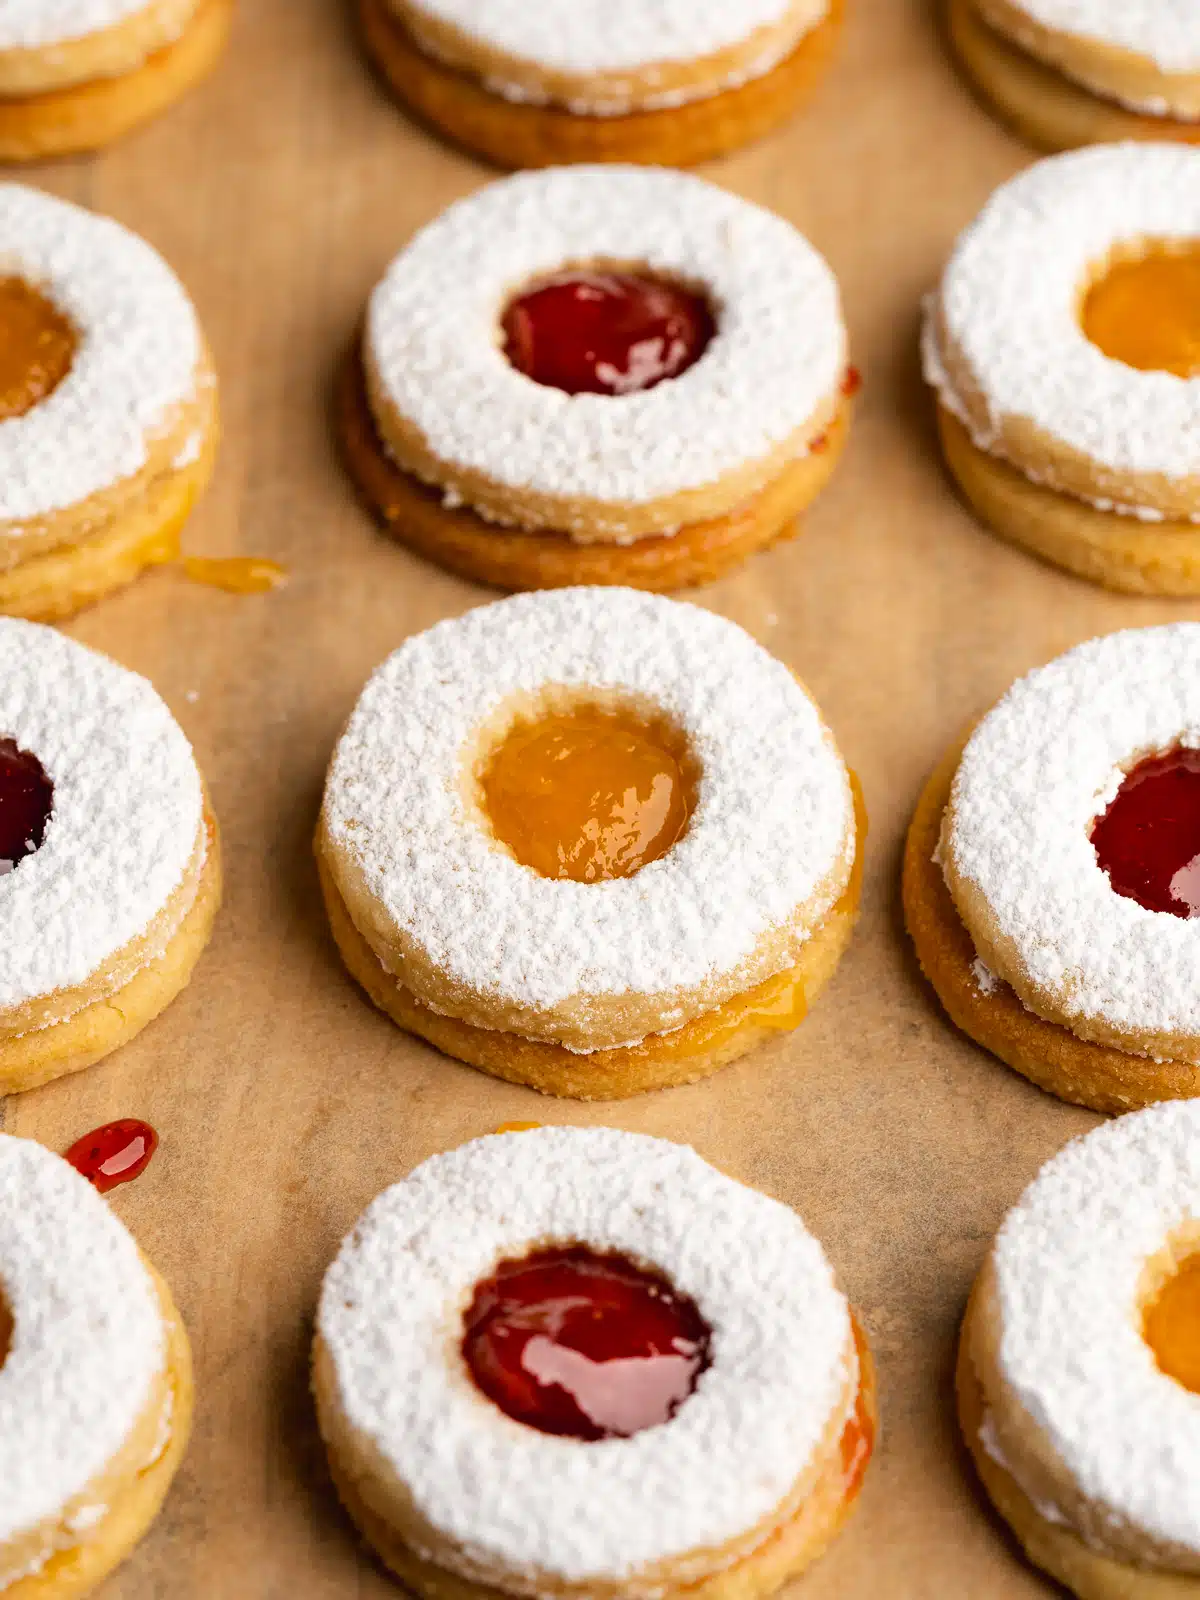 rows of jam and marmalade filled linzer cookies.